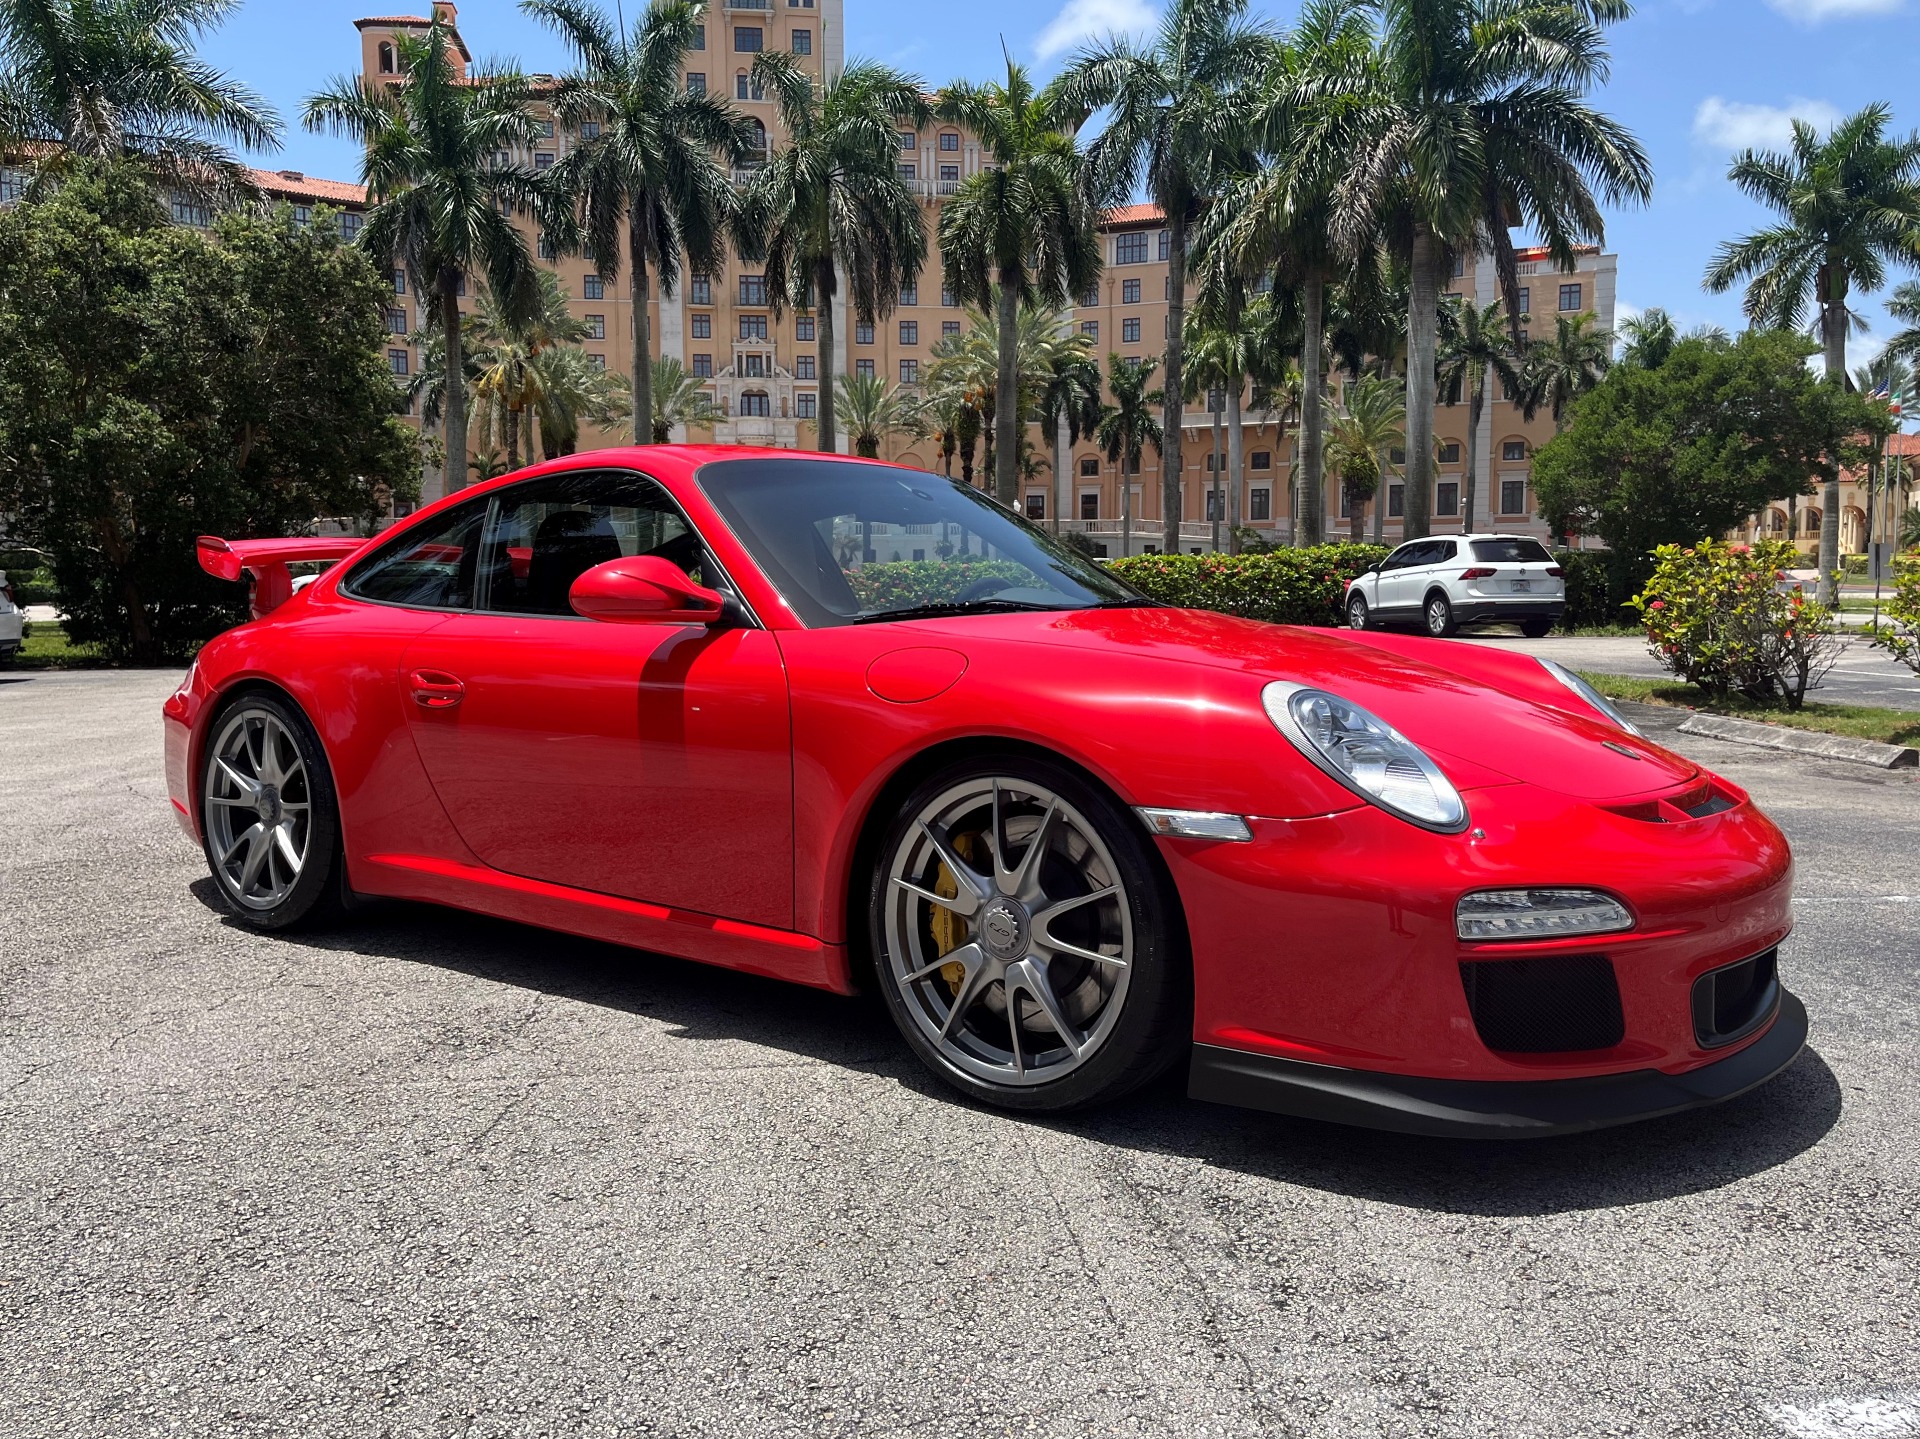 Used 2010 Porsche 911 GT3 for sale Sold at The Gables Sports Cars in Miami FL 33146 1